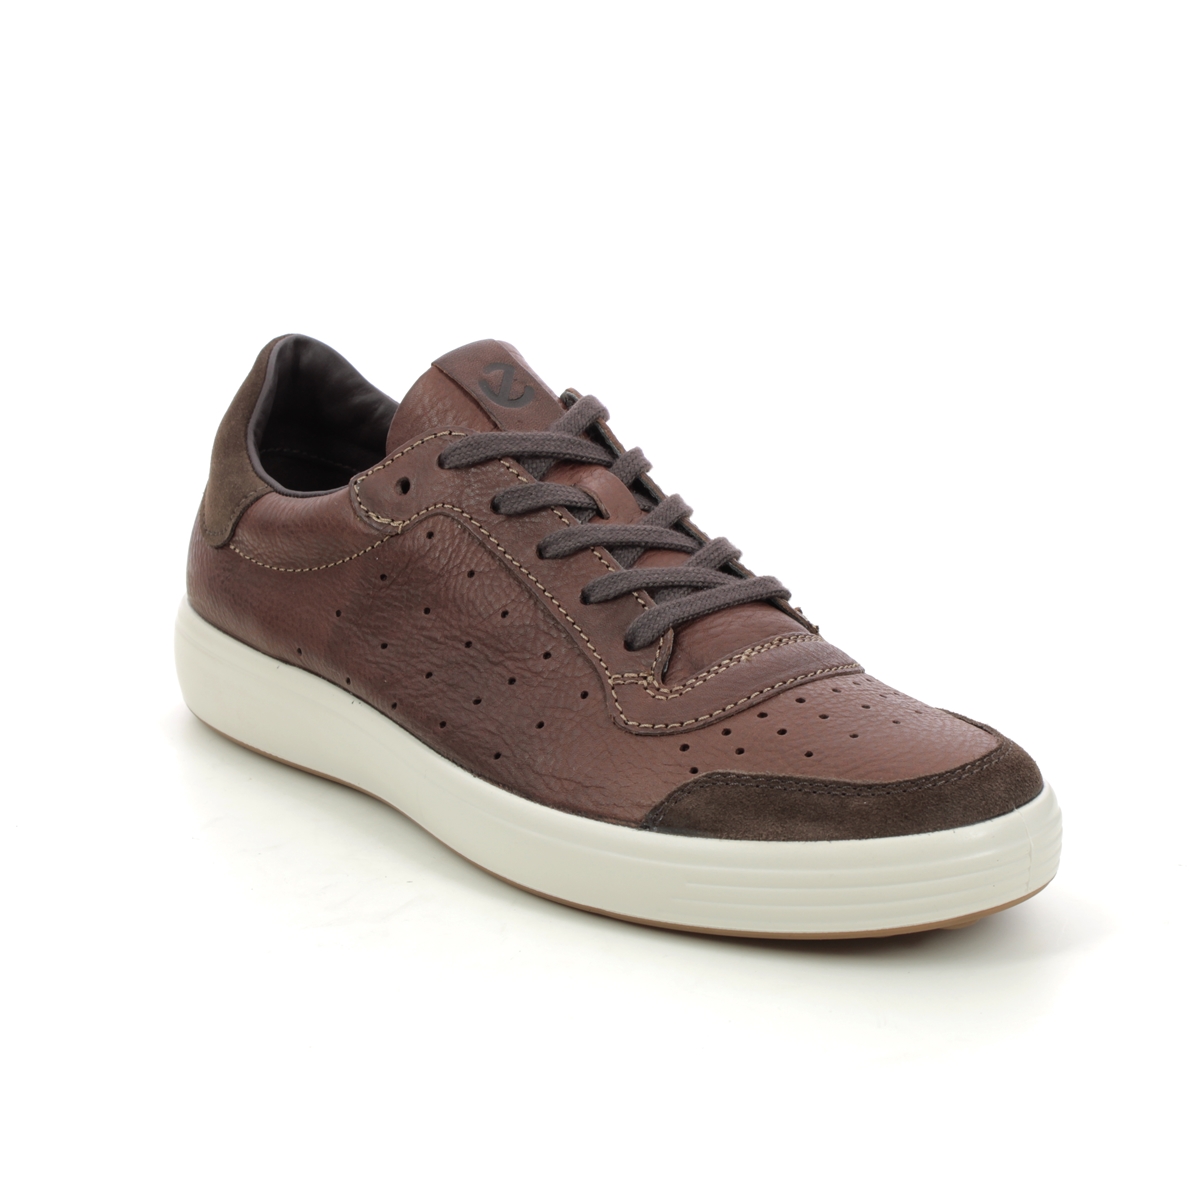 Ecco Soft 7 Mens Brown Leather Mens Trainers 470474-60508 In Size 43 In Plain Brown Leather